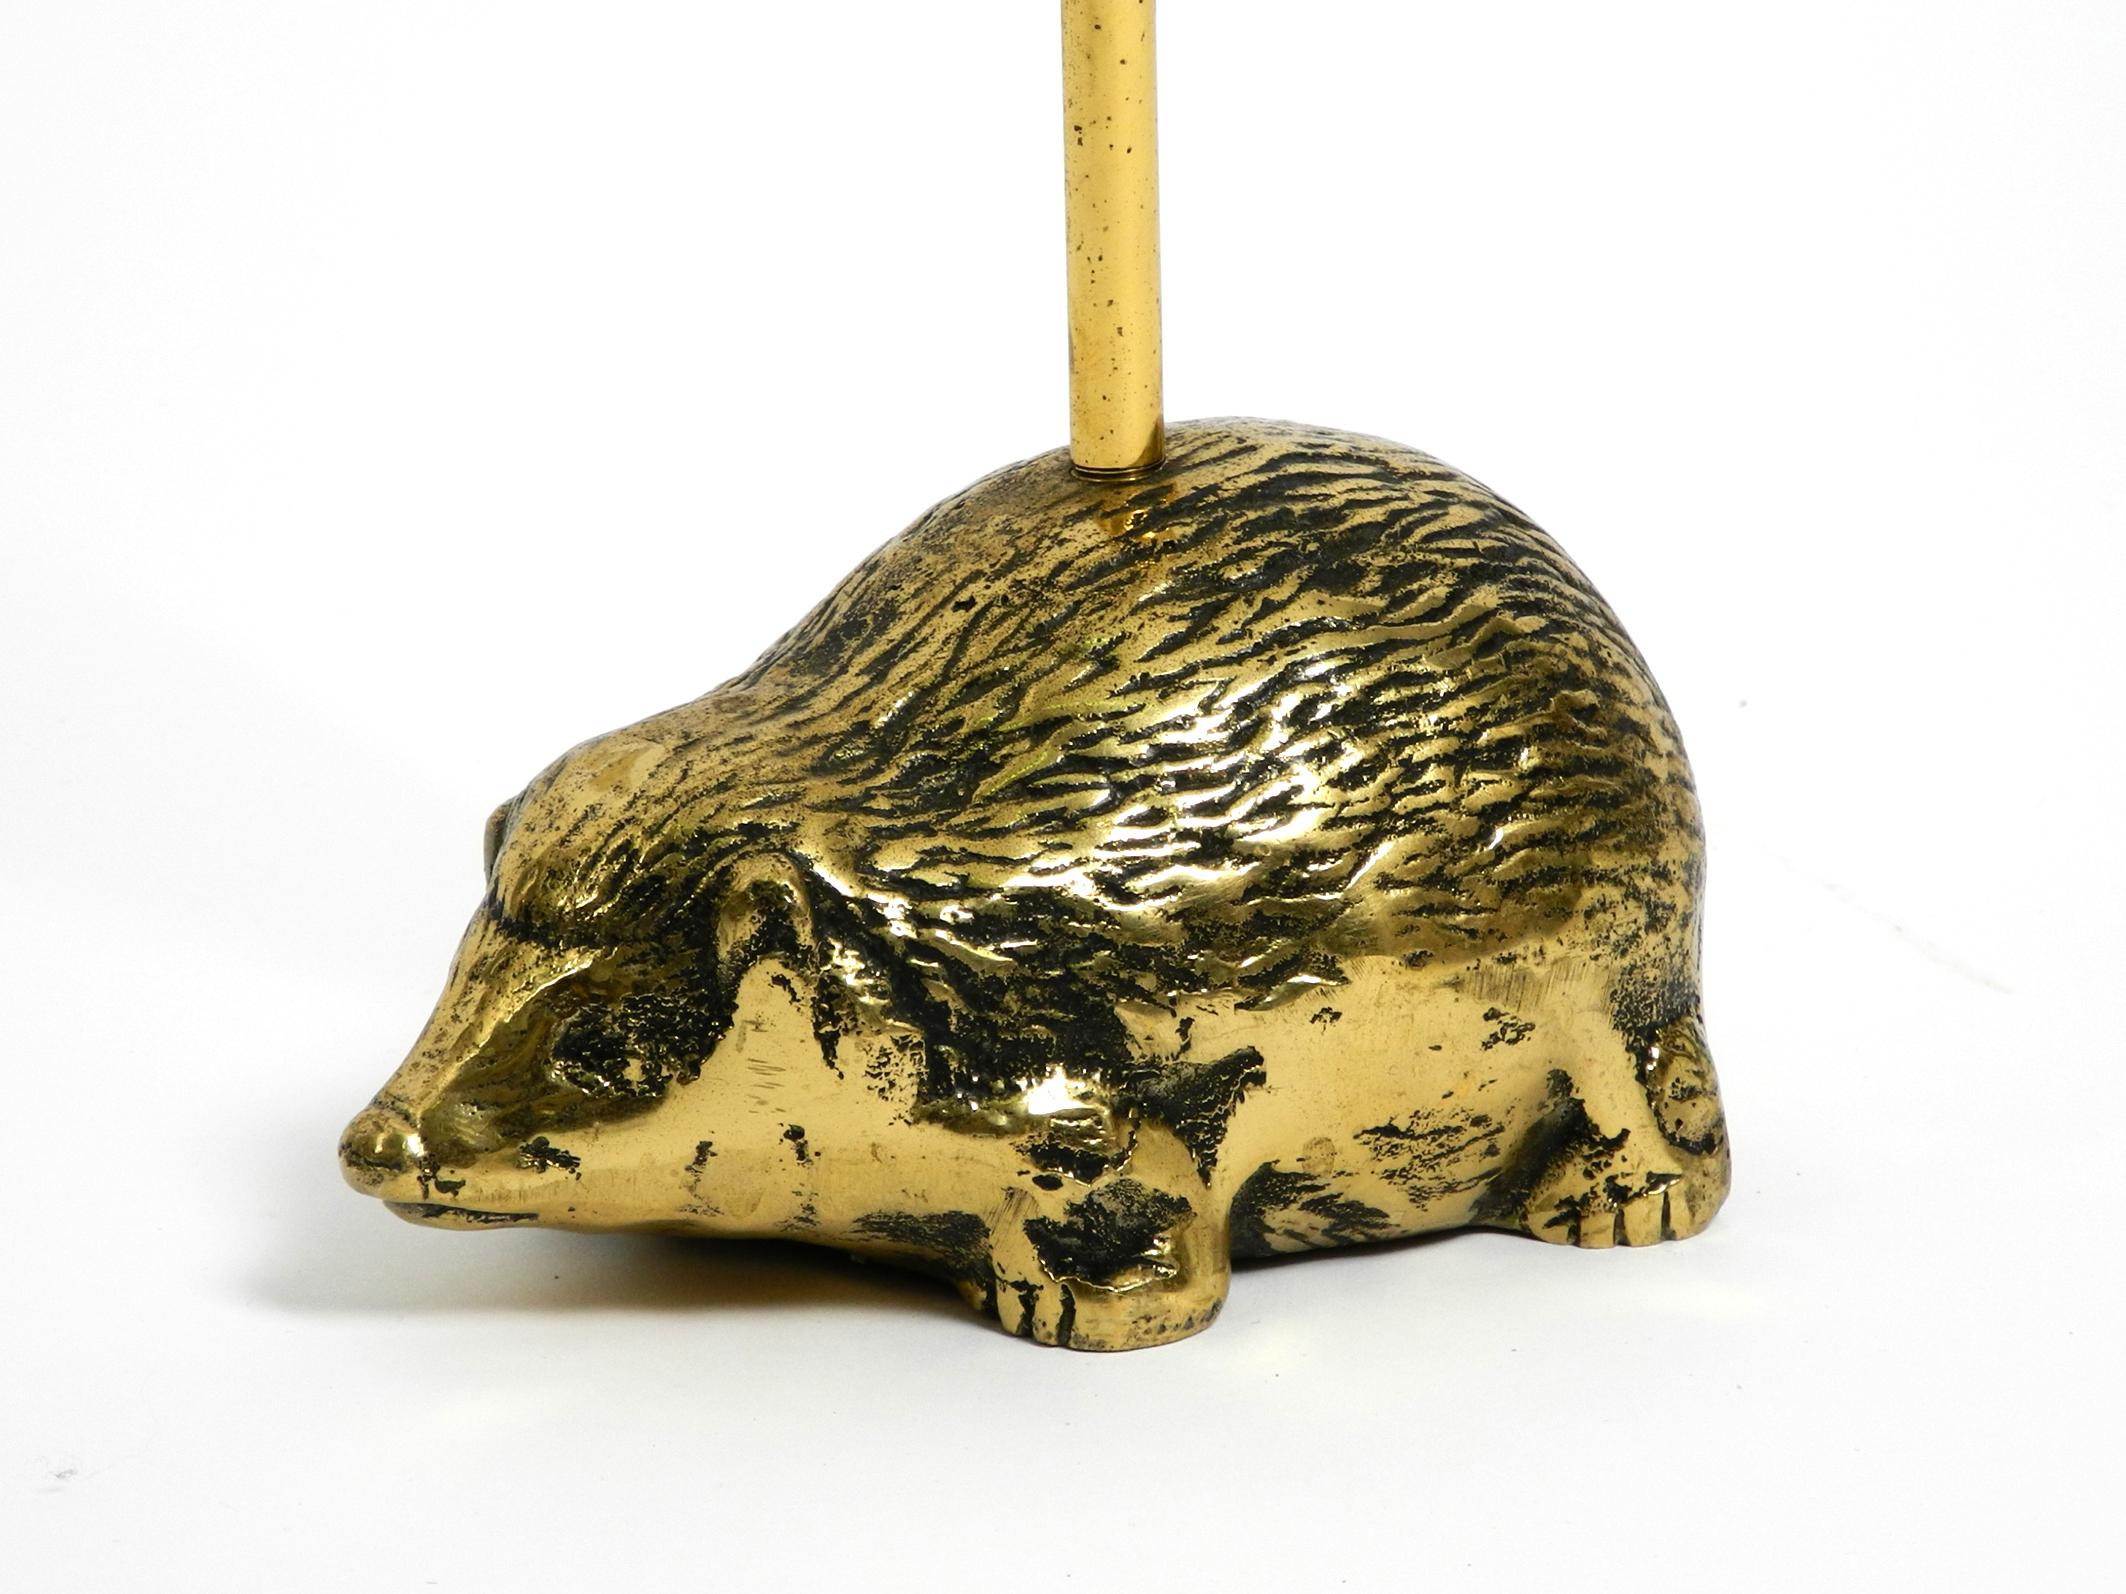 European Rare, Very Heavy 1960s Doorstop Made of Solid Brass in the Shape of a Hedgehog